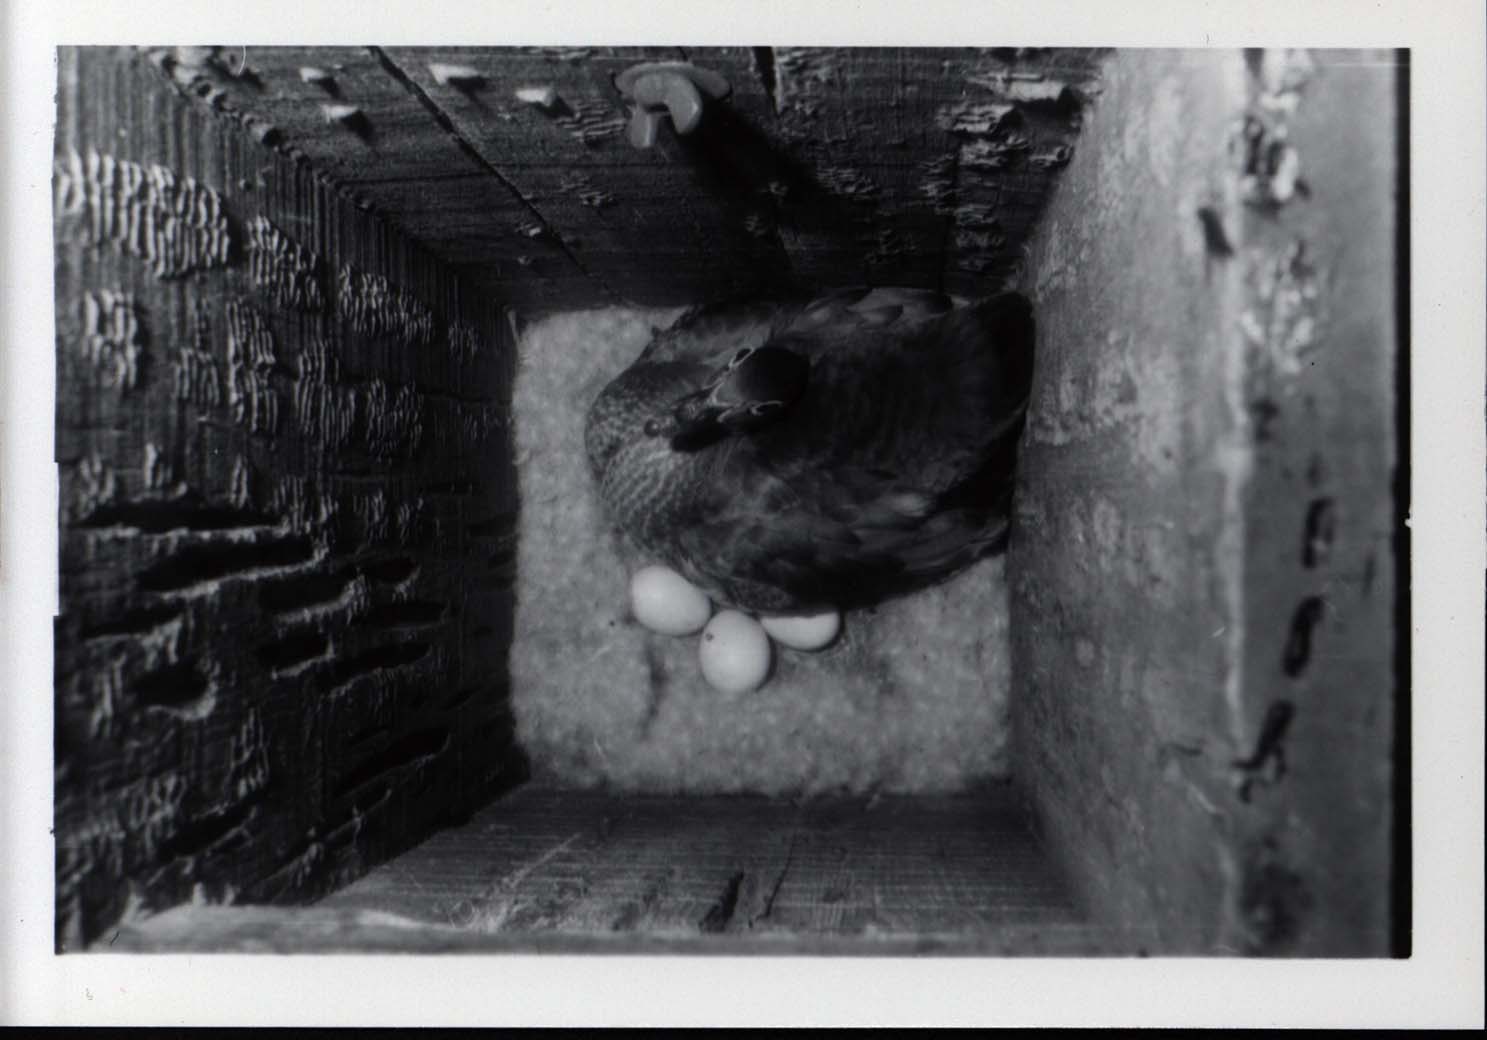 Photograph of mother Wood Duck sitting on eggs in a duck house